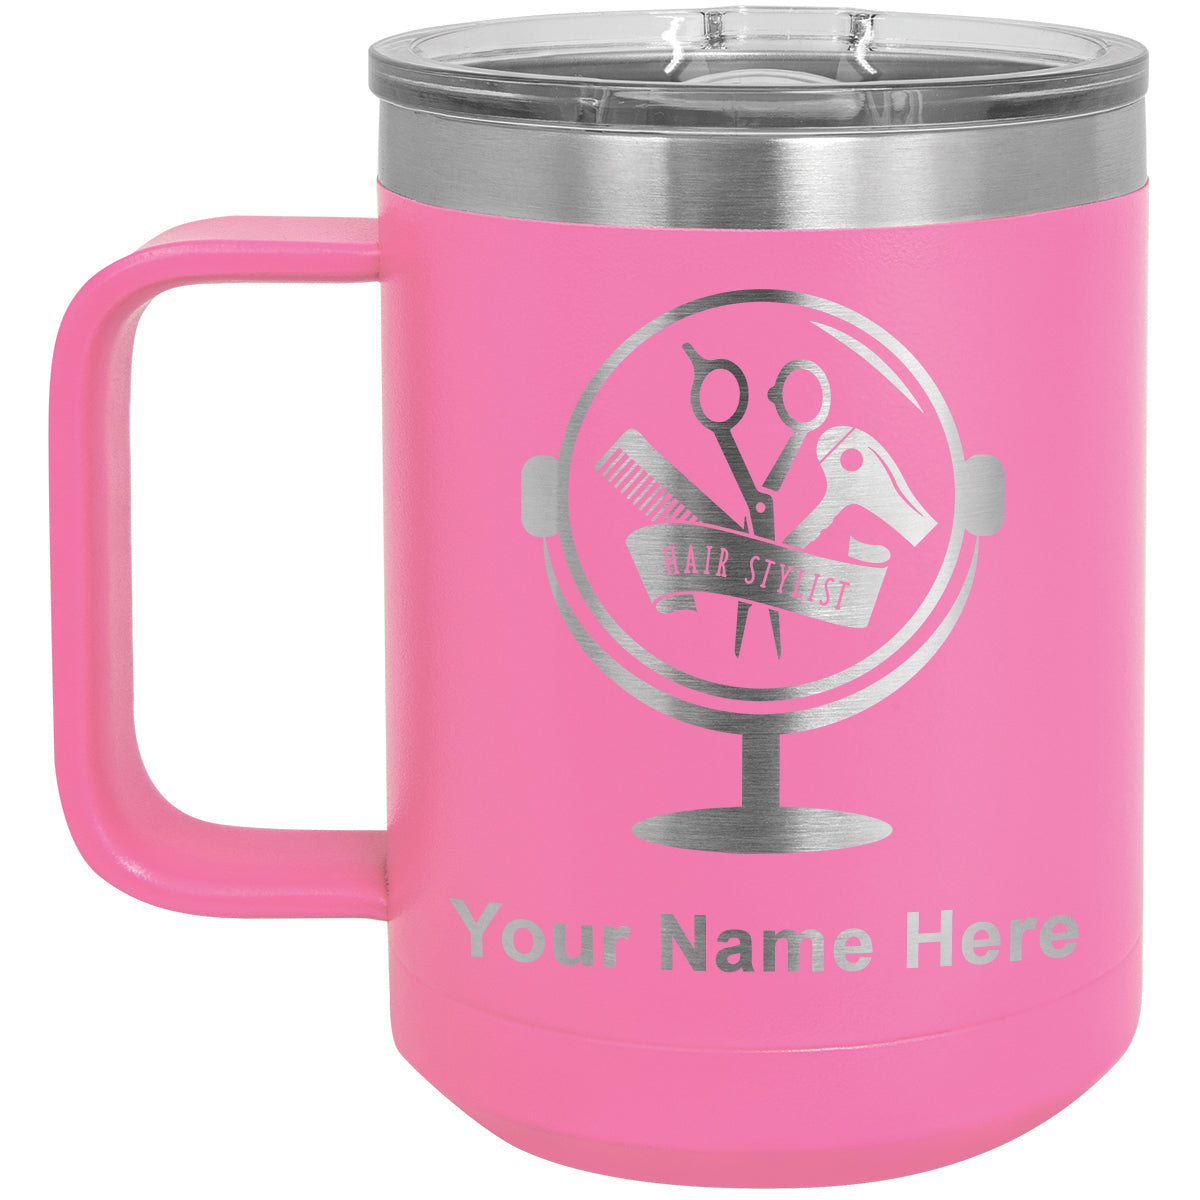 15oz Vacuum Insulated Coffee Mug, Hair Stylist, Personalized Engraving Included